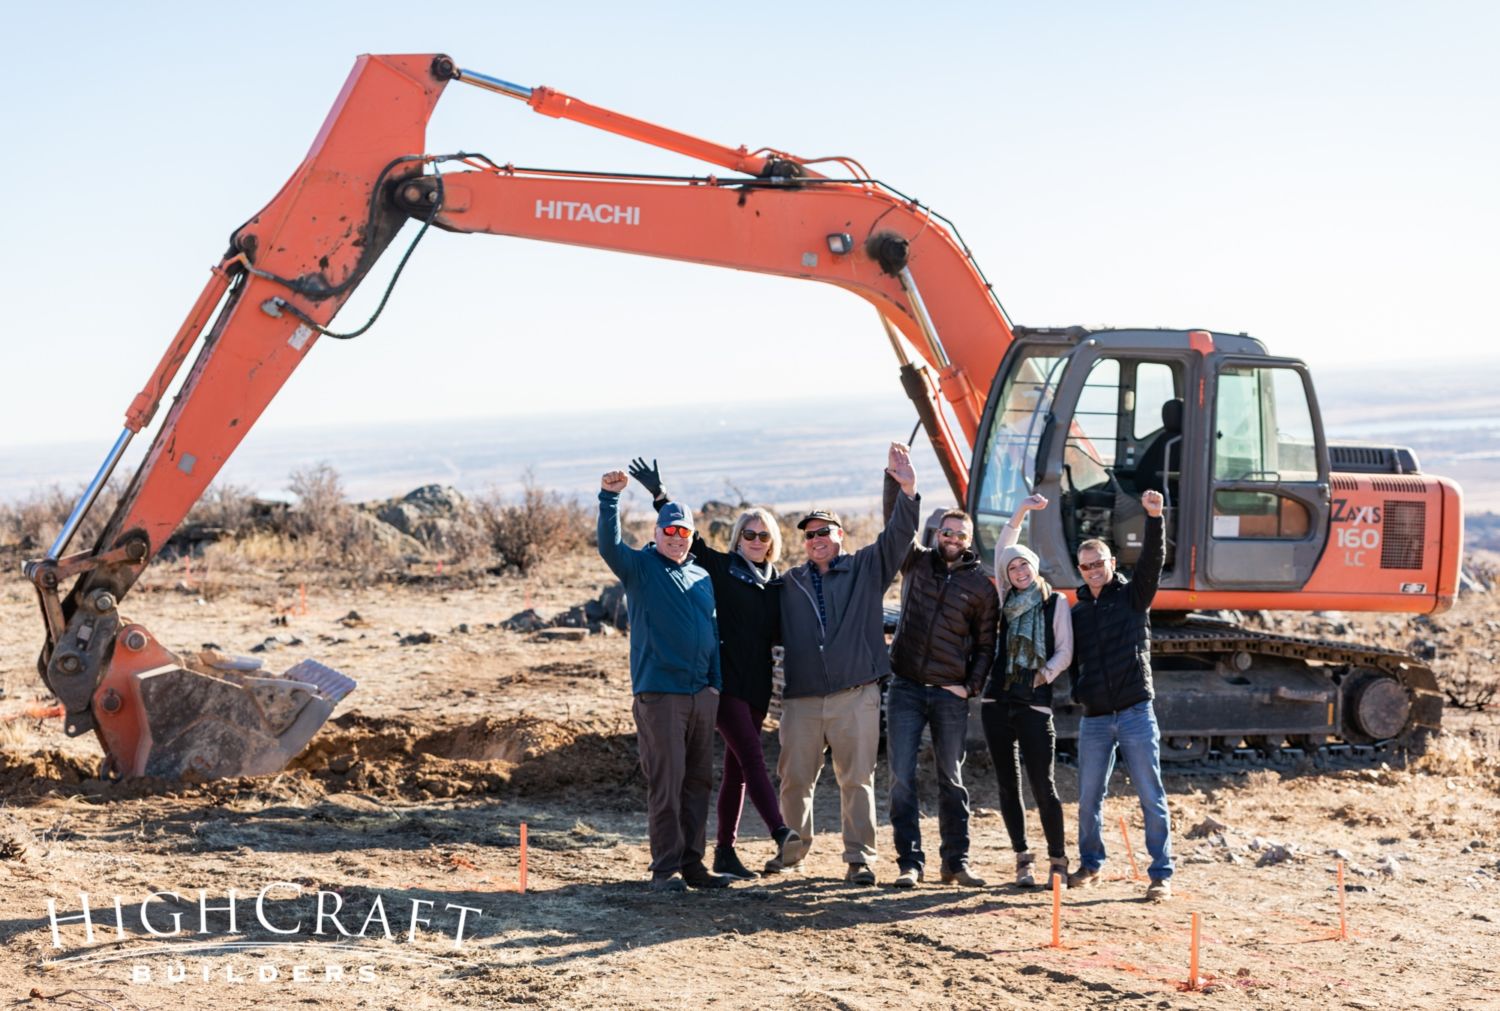 custom-home-groundbreaking-northern-colorado-HighCraft-design-build-team-with-clients-victory-arms